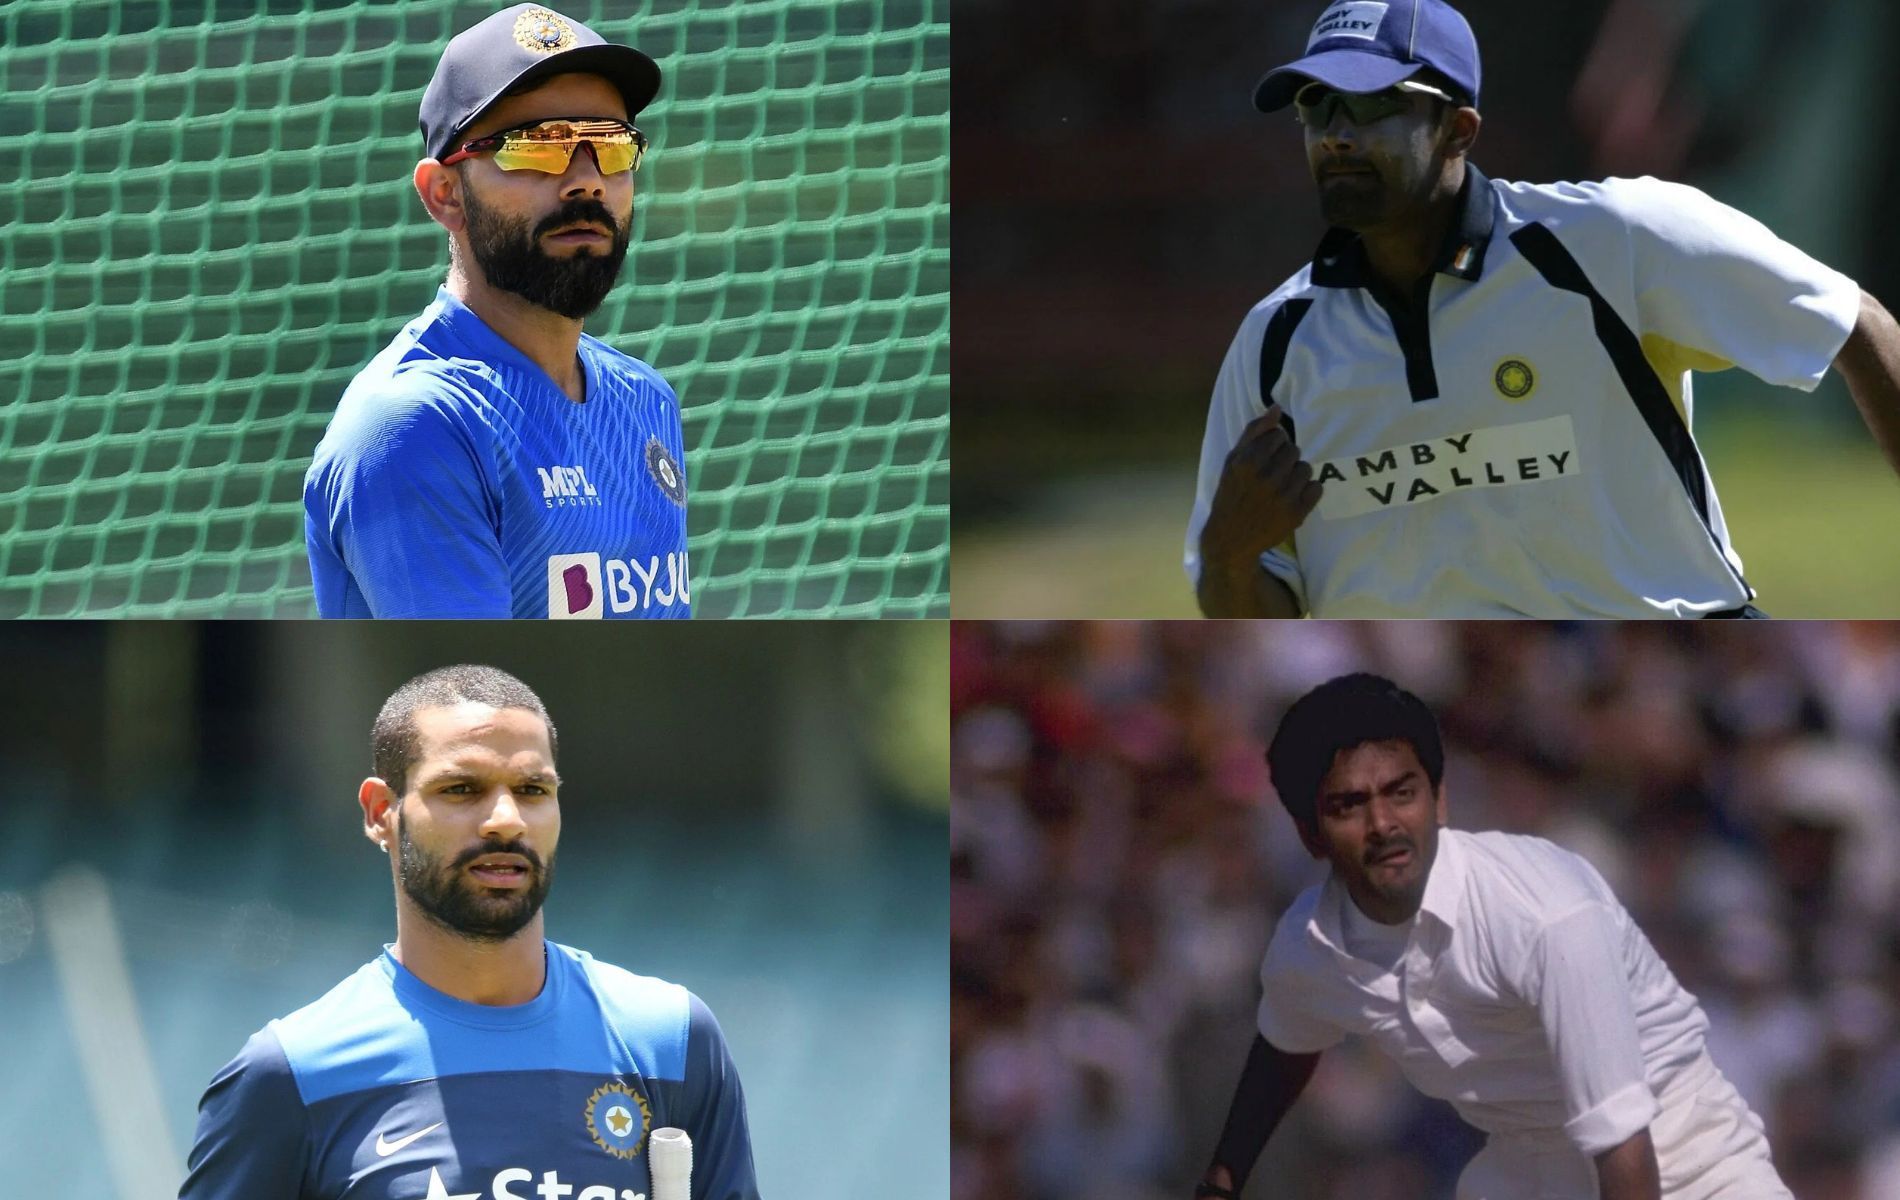 Indian cricketers have some interesting nicknames. Pics: Getty Images